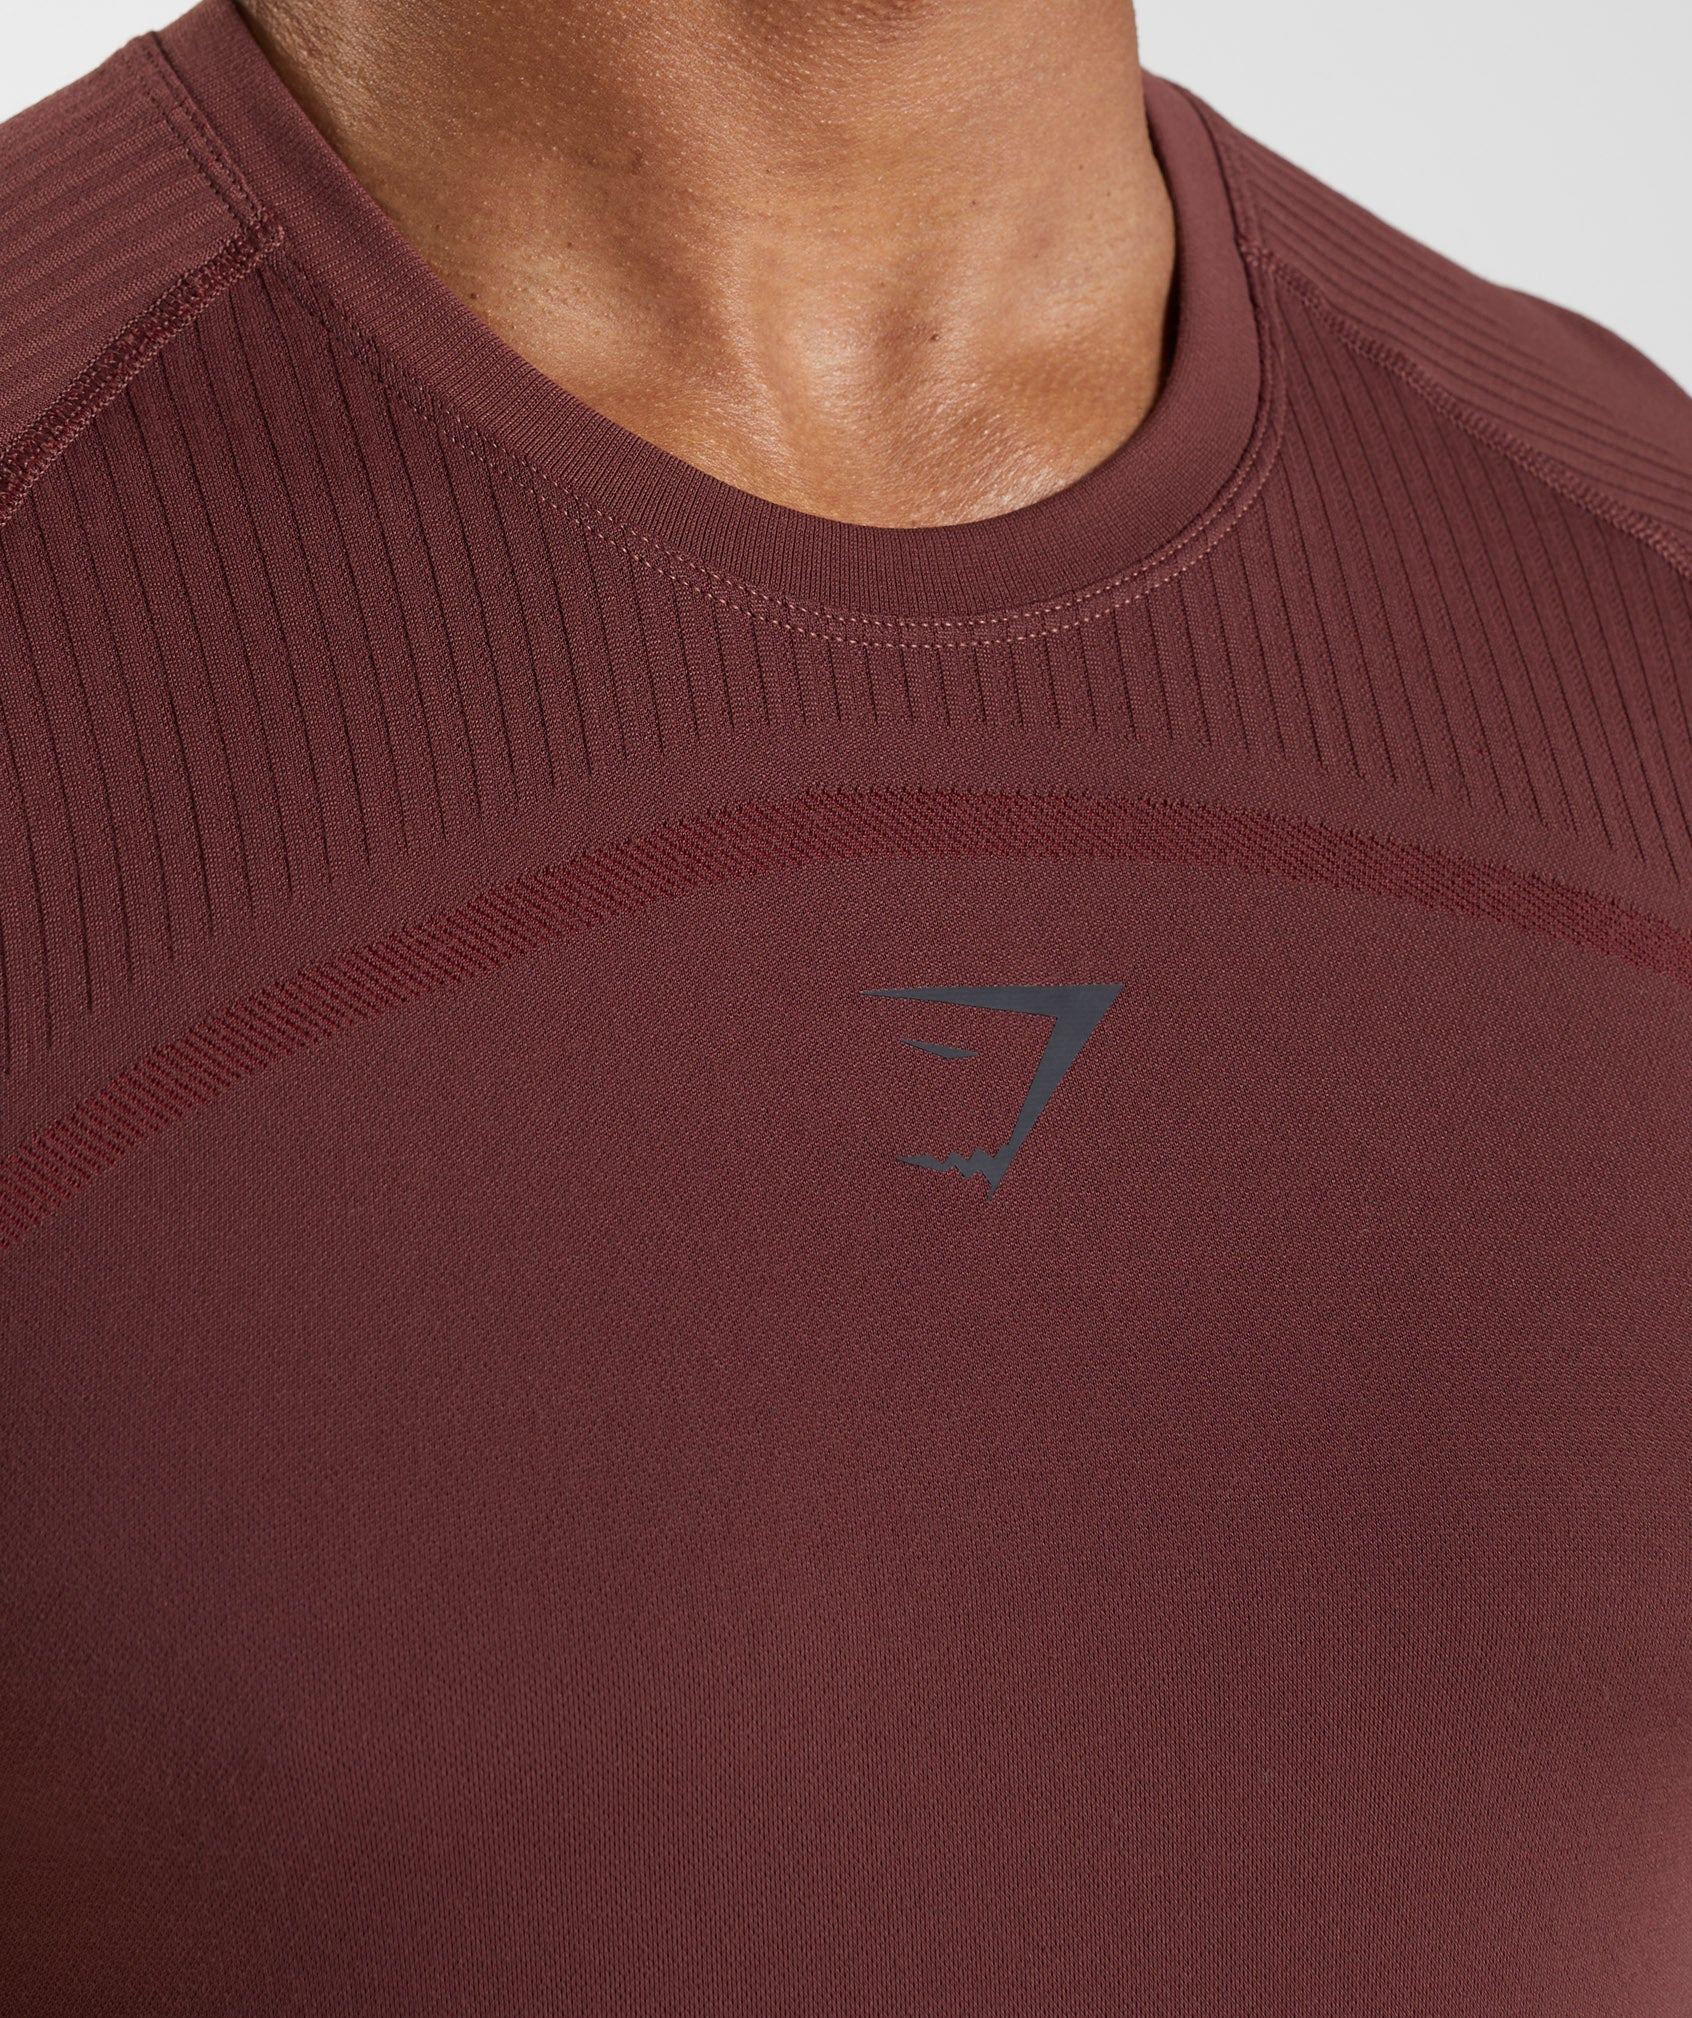 315 Seamless T-Shirt in Cherry Brown - view 5